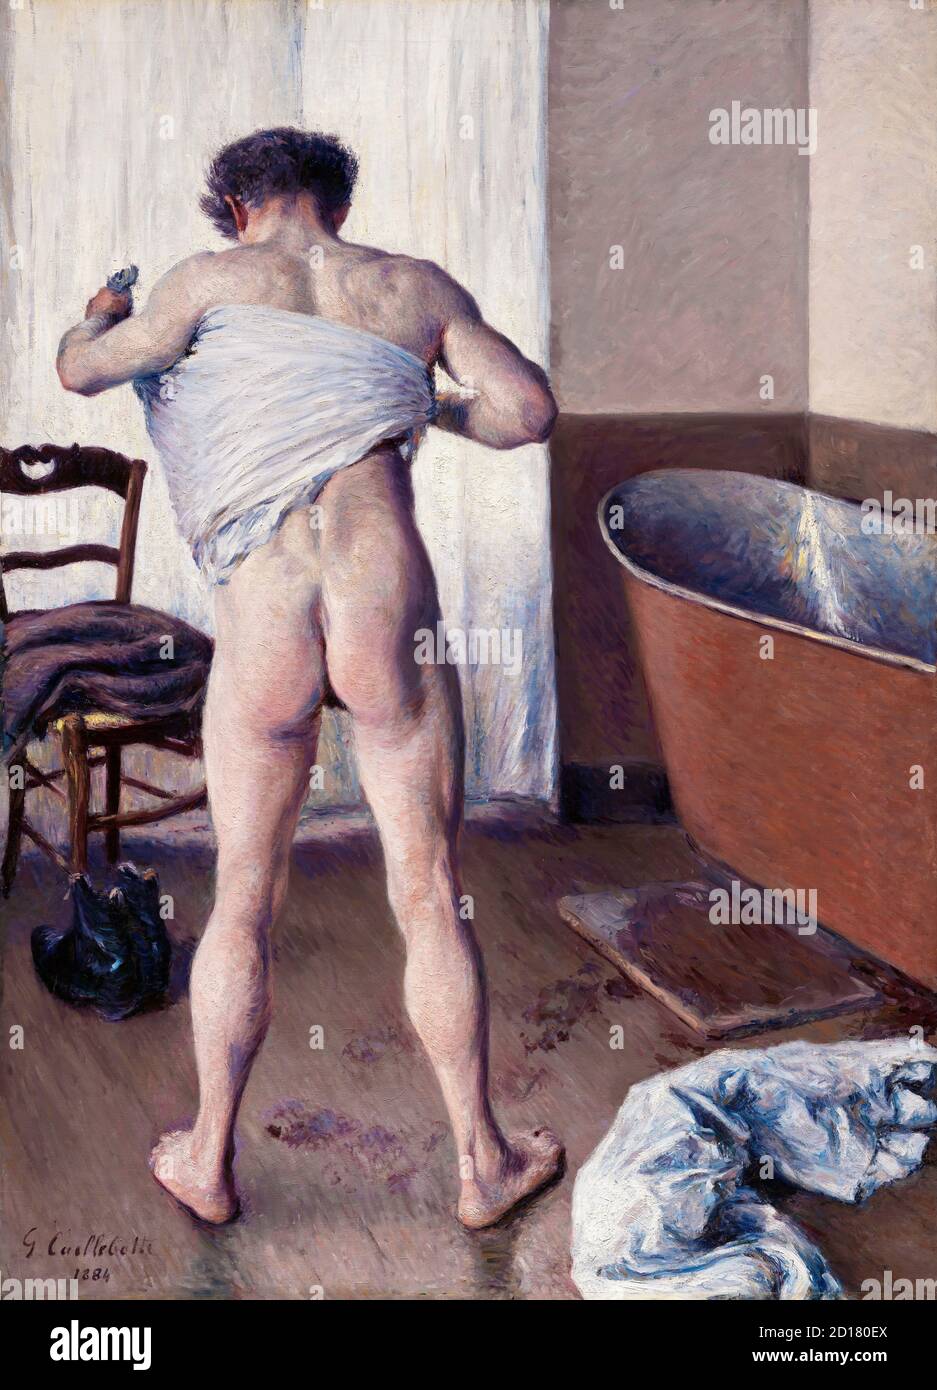 Man at His Bath by Gustave Caillebotte (1848-1894), oil on canvas, 1884 Stock Photo